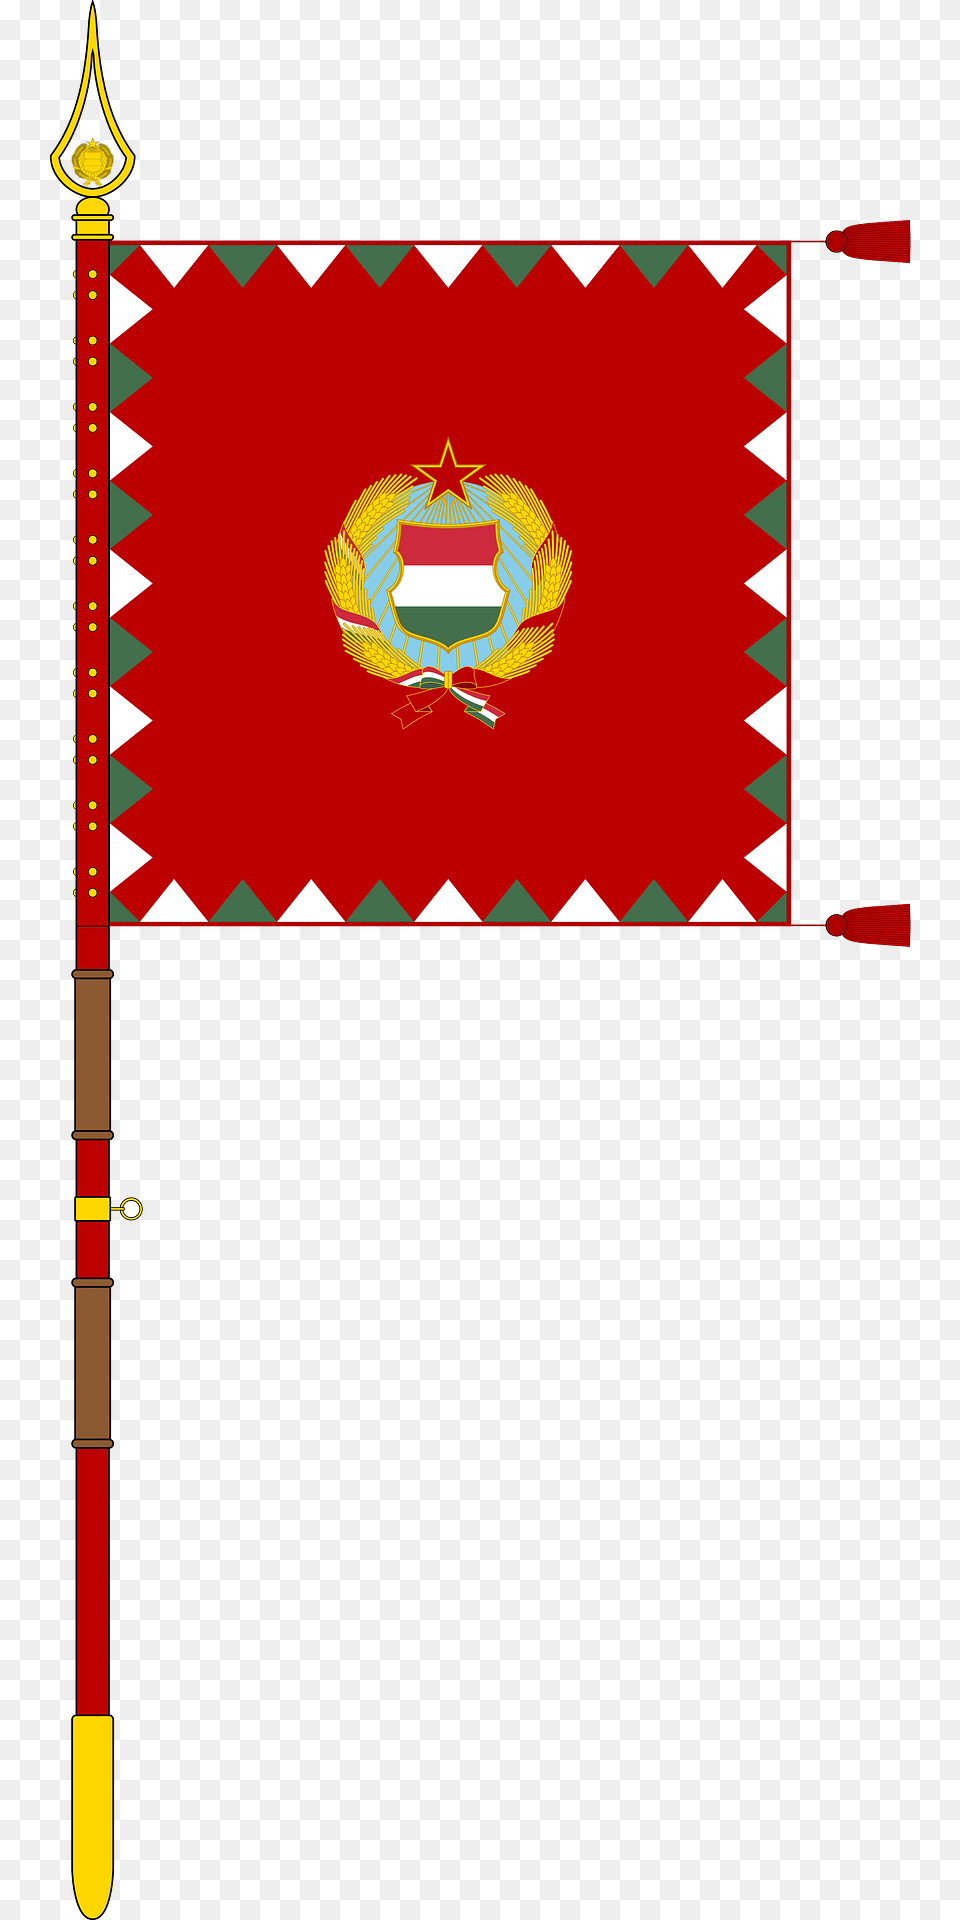 Cavalry Standard Of The Hungarian People39s Army 1957 1976 With Staff Clipart Free Png Download